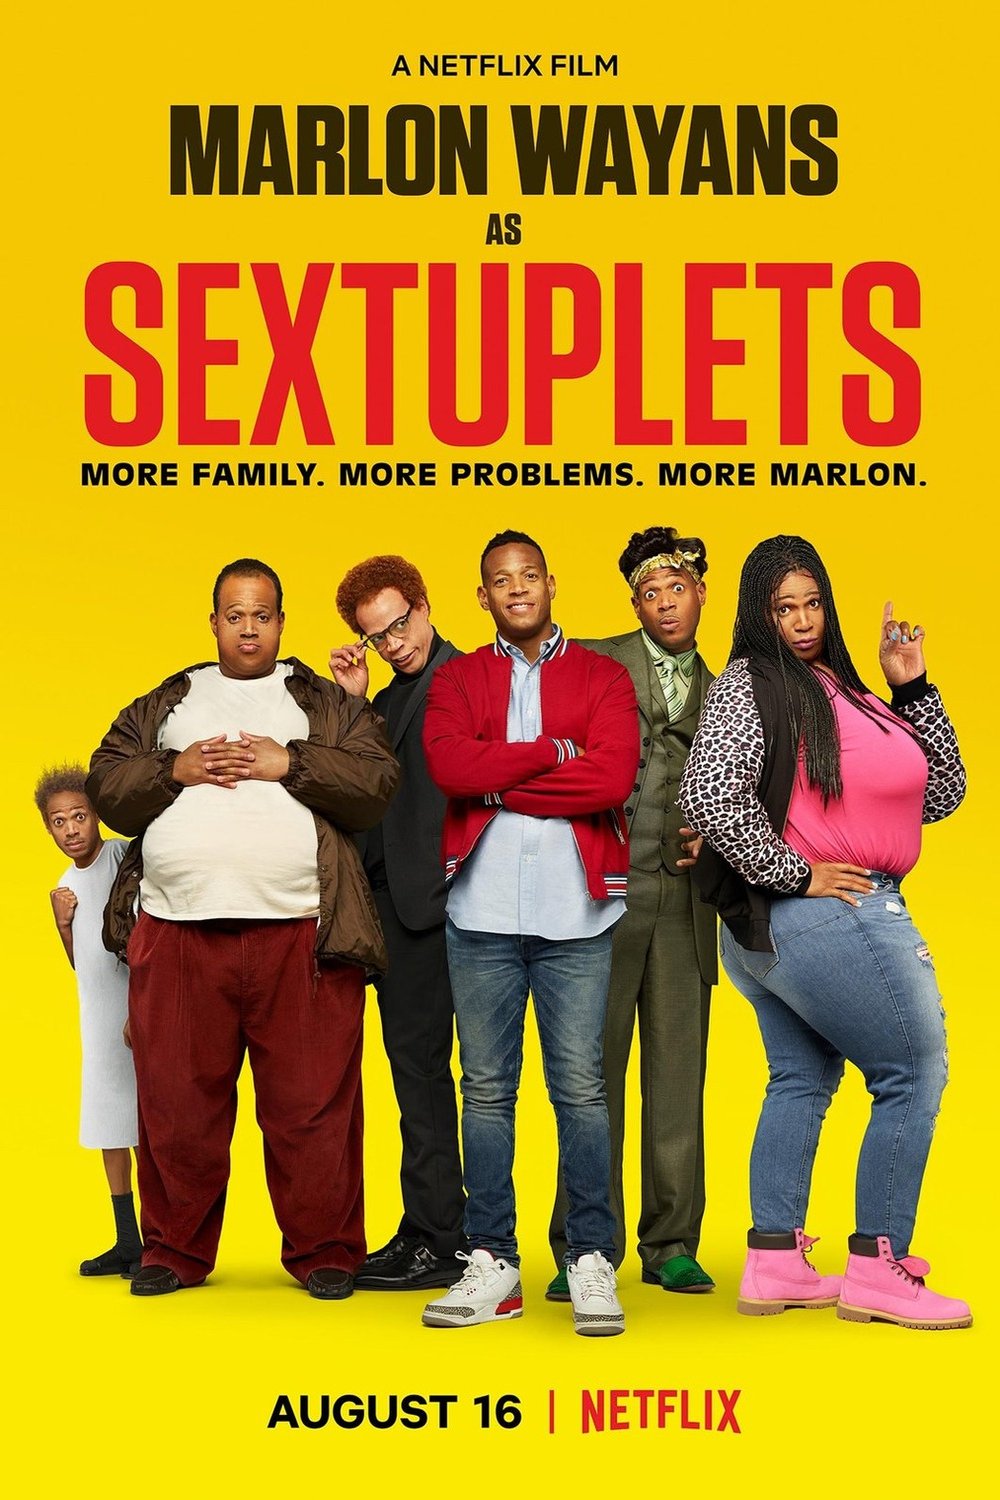 Poster of the movie Sextuplets